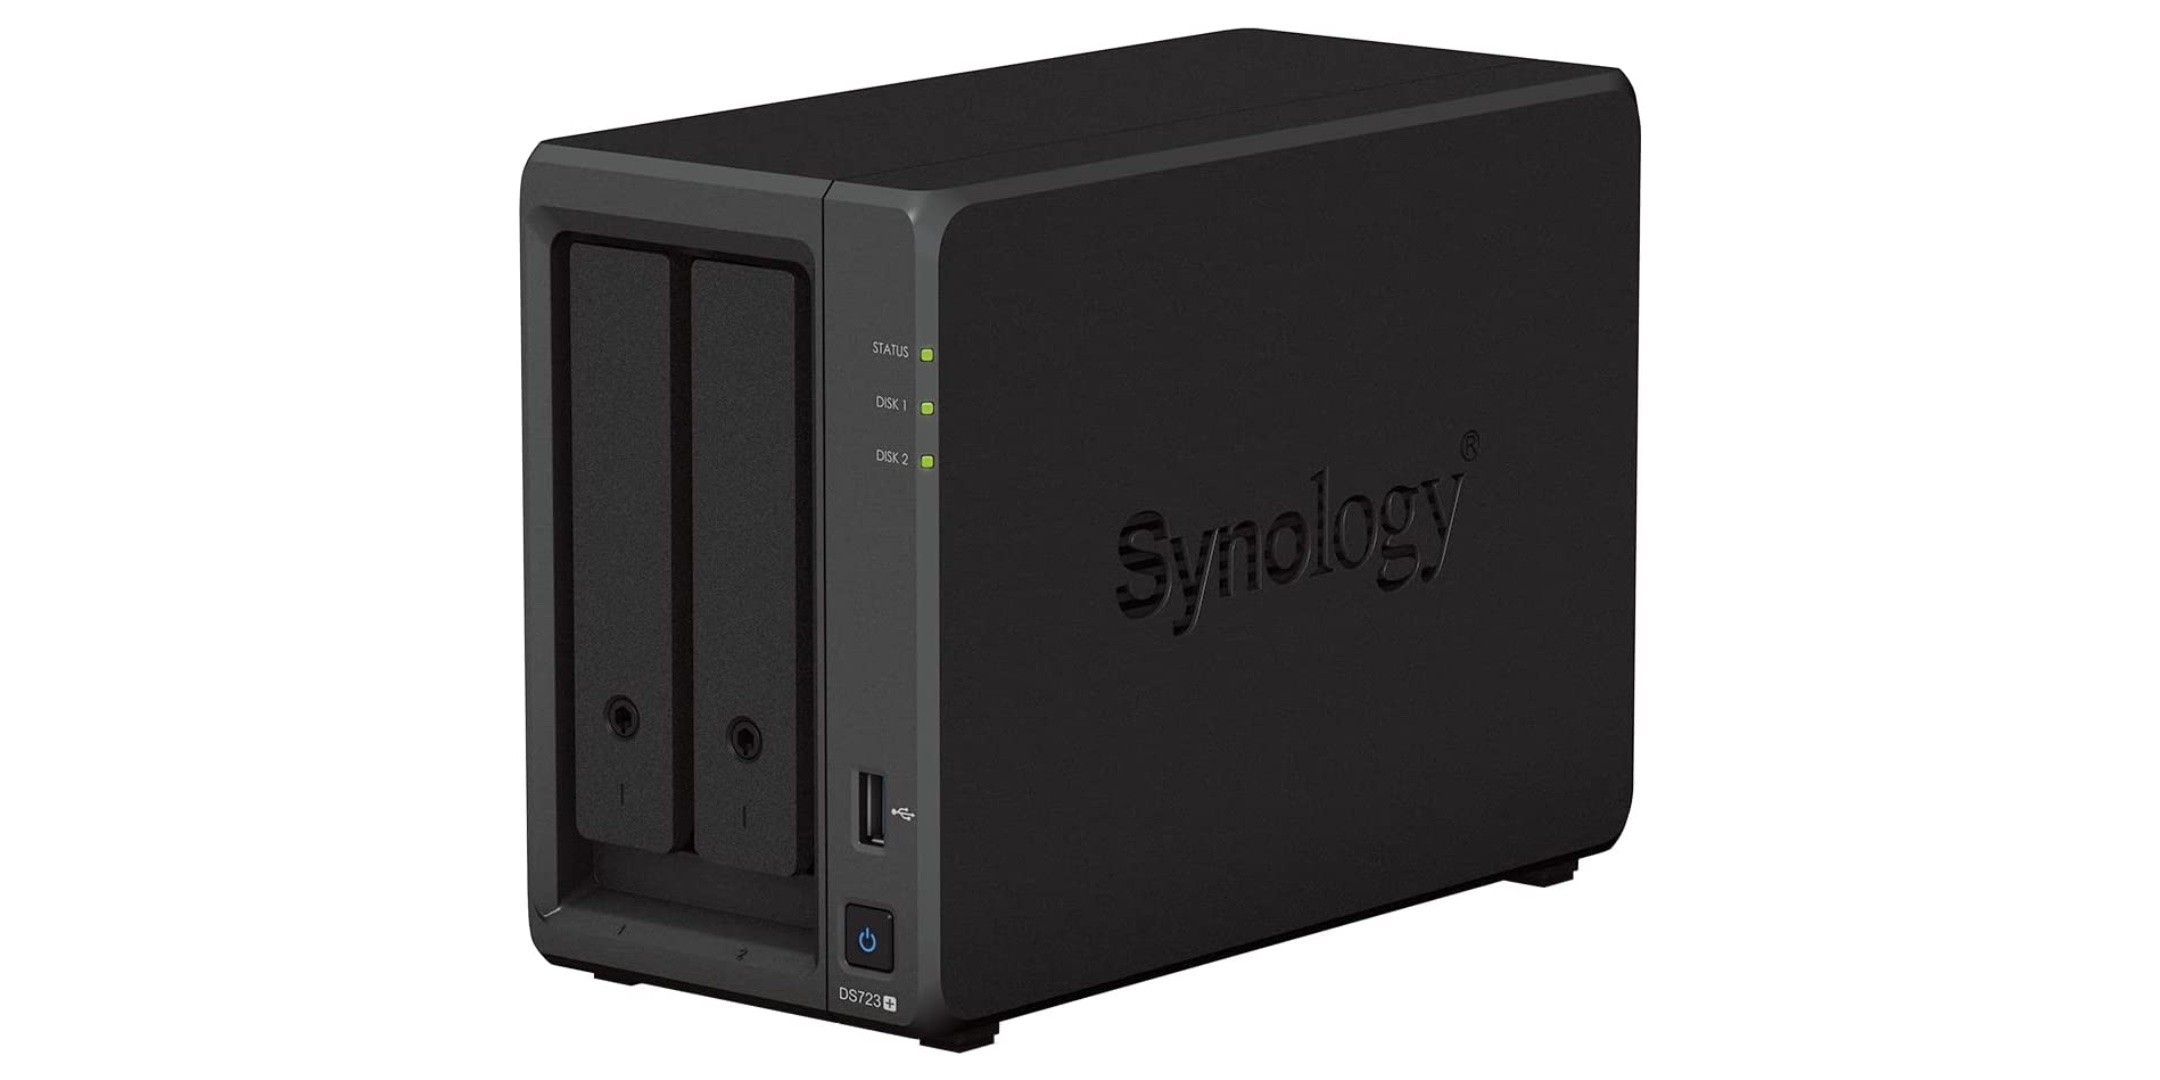 Synology DS723+ NAS sports an upgradeable 10GbE NIC, more